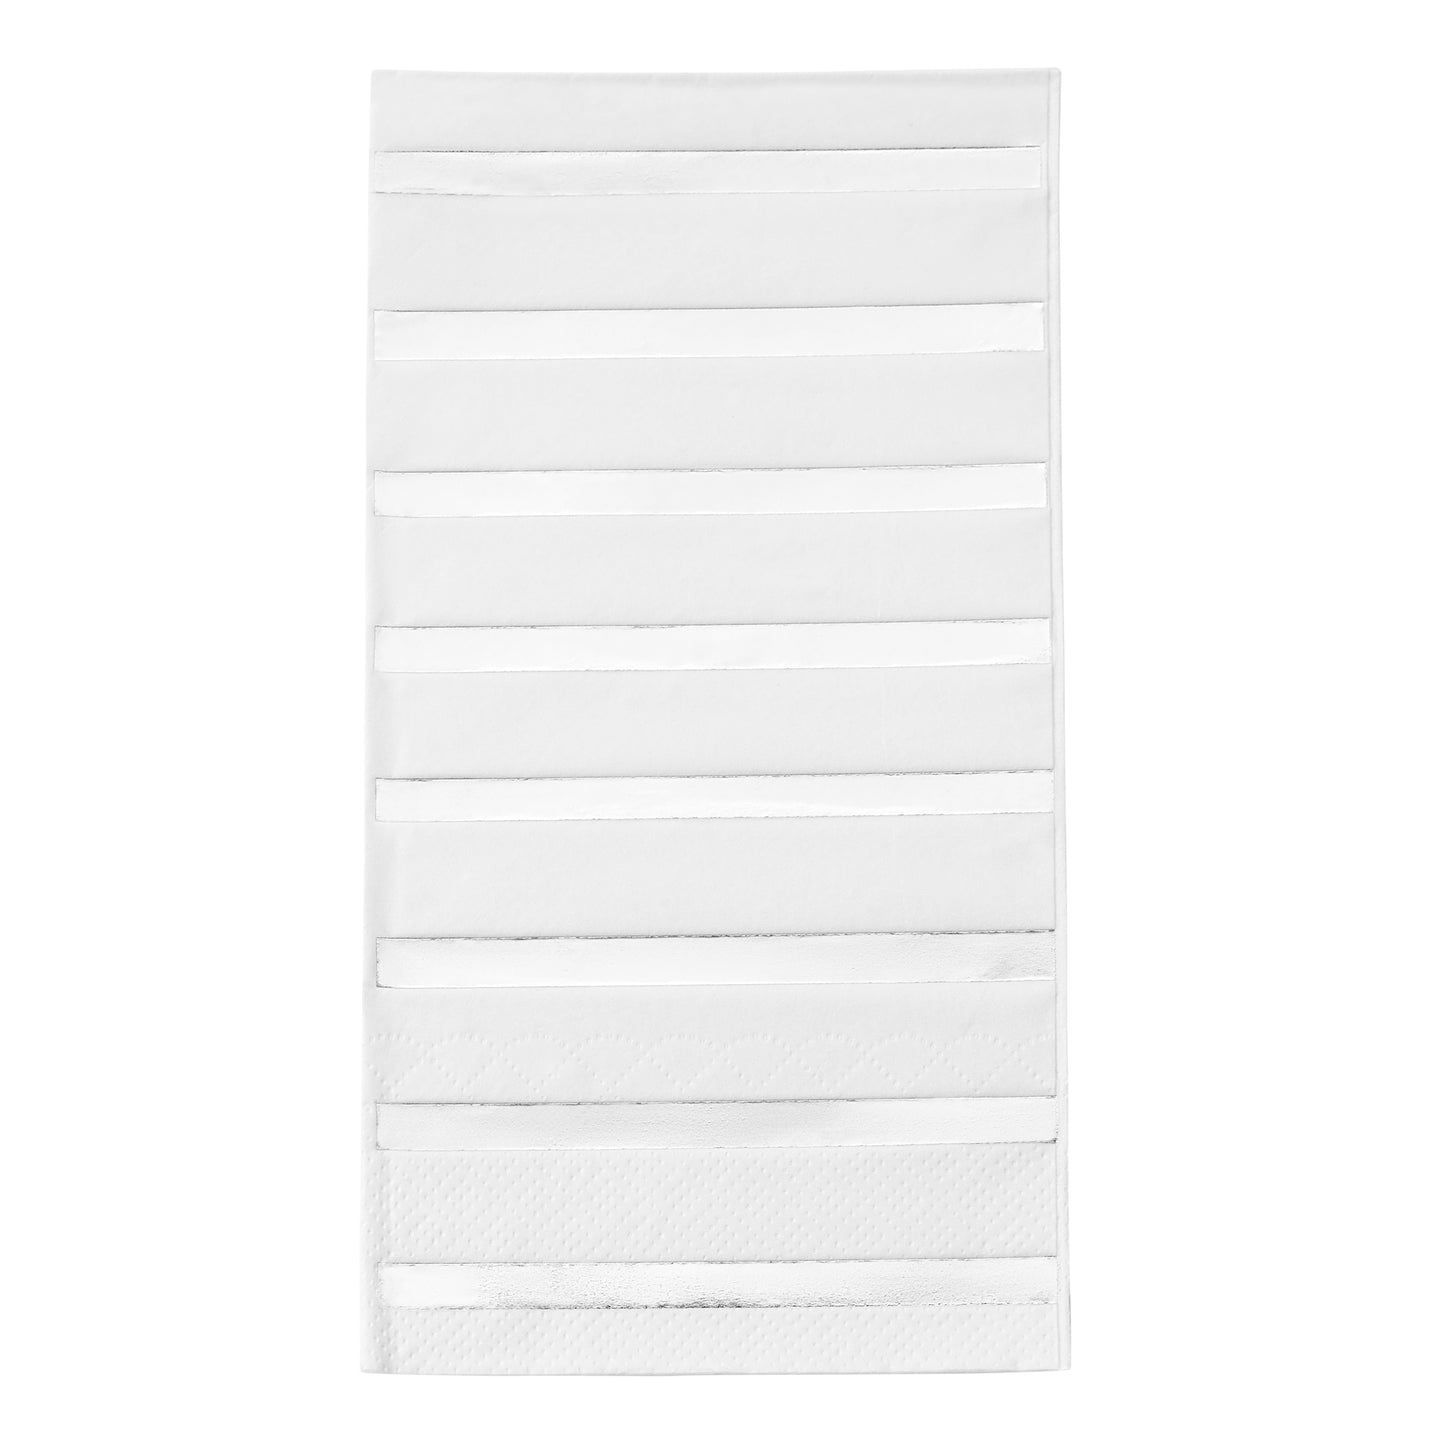 White with Silver Stripes Disposable Paper Dinner Napkins